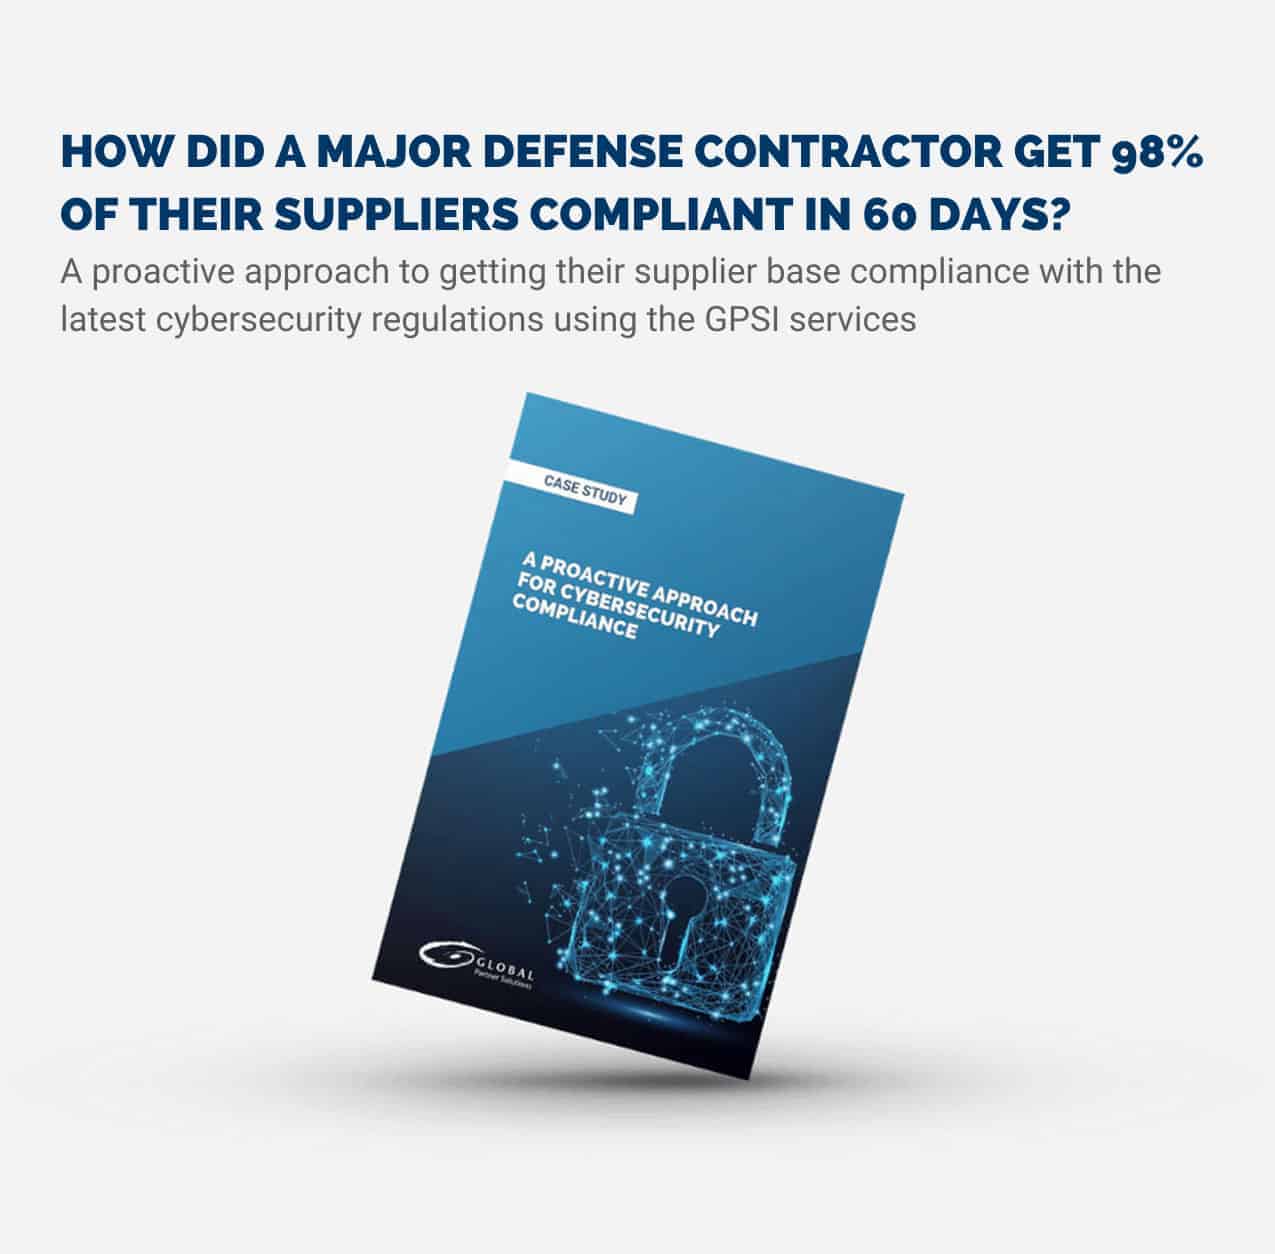 How did a major defense contractor get 98% of their suppliers compliant in 60 days.